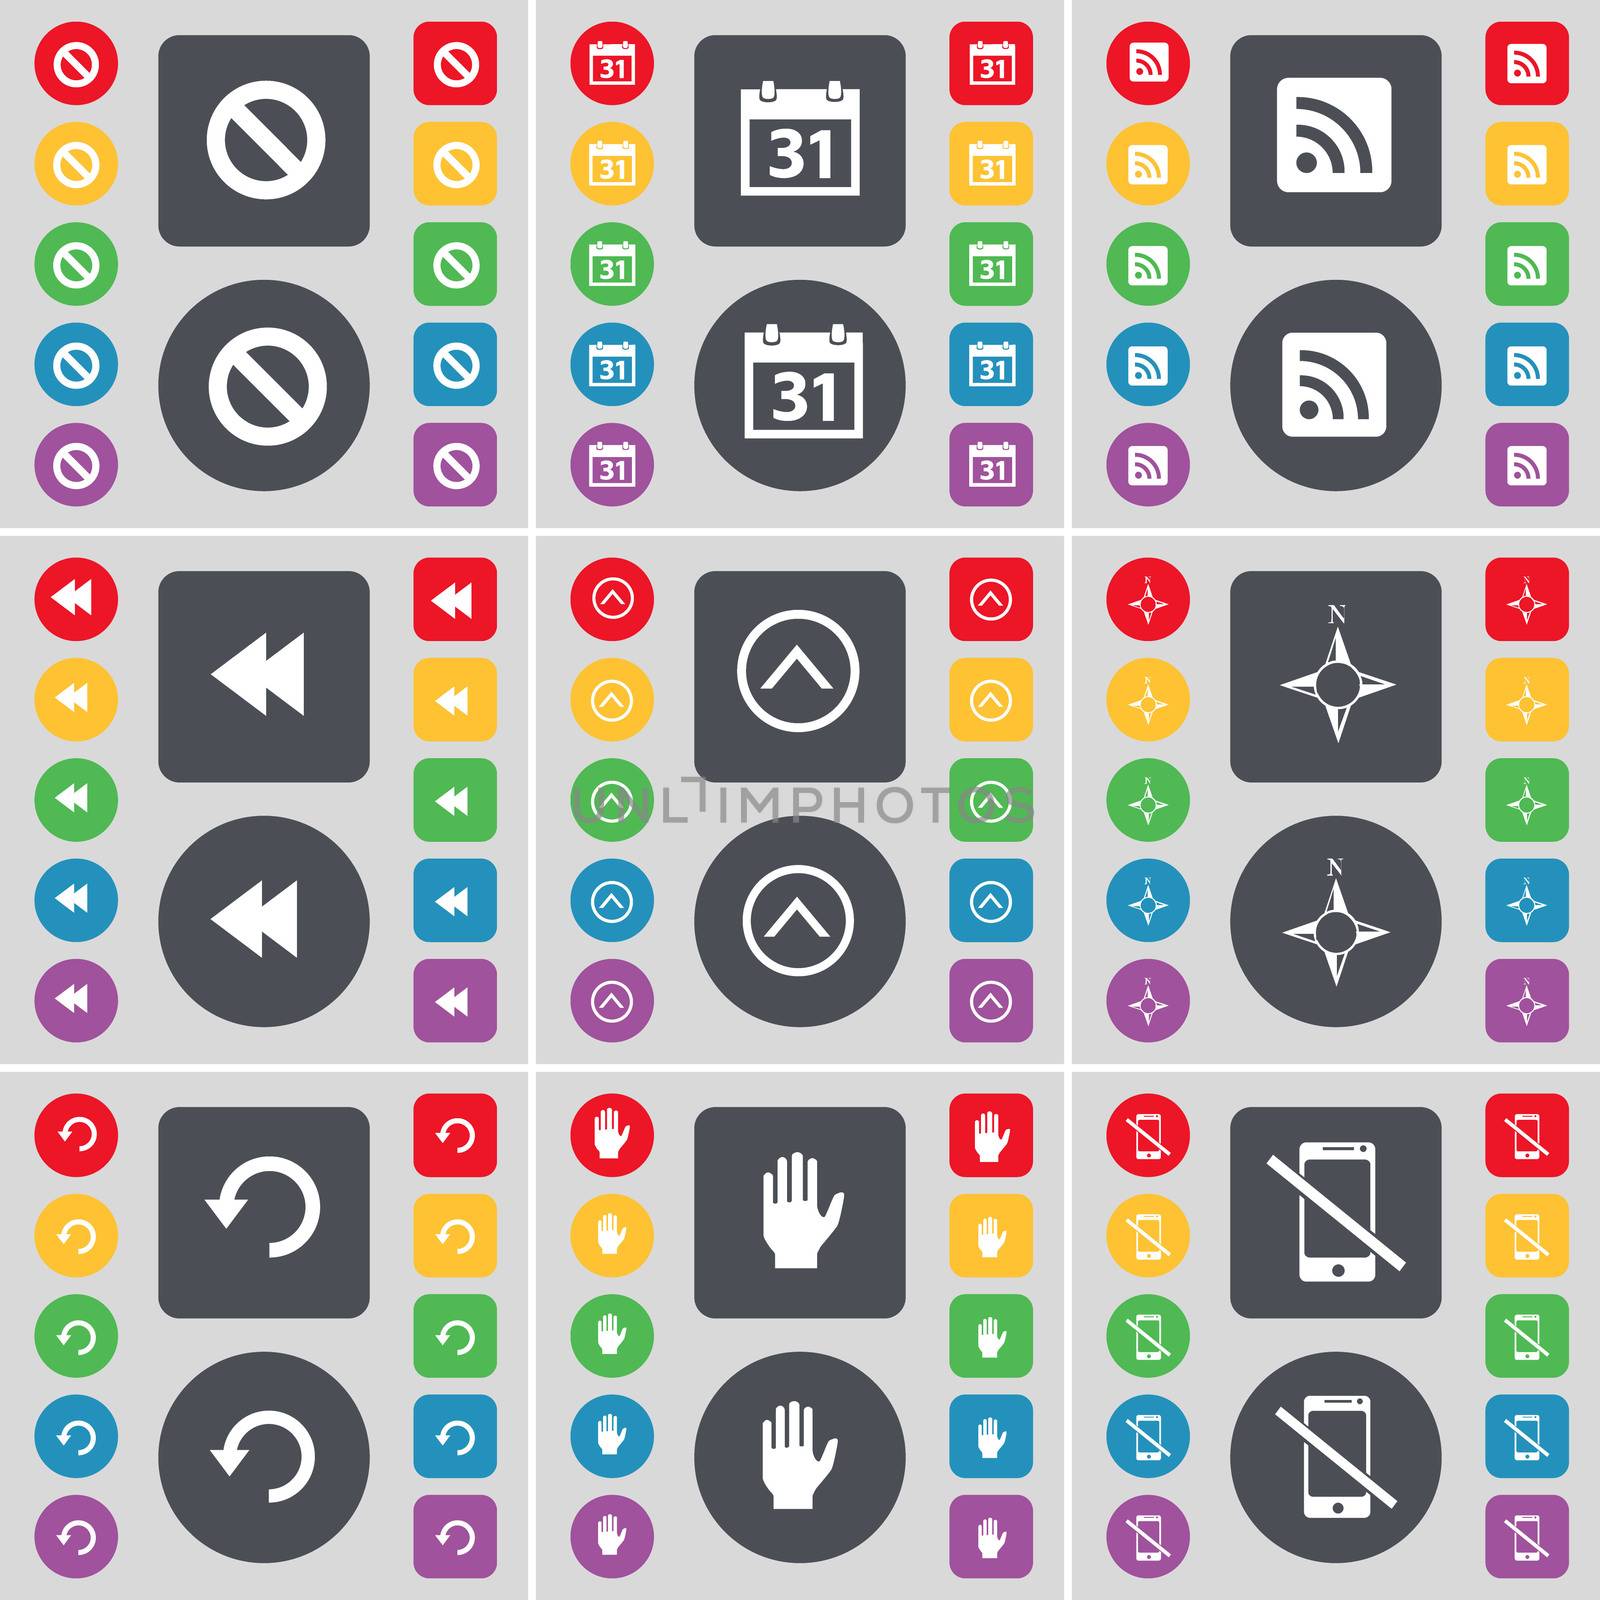 Stop, Calendar, RSS, Rewind, Arrow up, Compass, Reload, Hand, Smartphone icon symbol. A large set of flat, colored buttons for your design.  by serhii_lohvyniuk